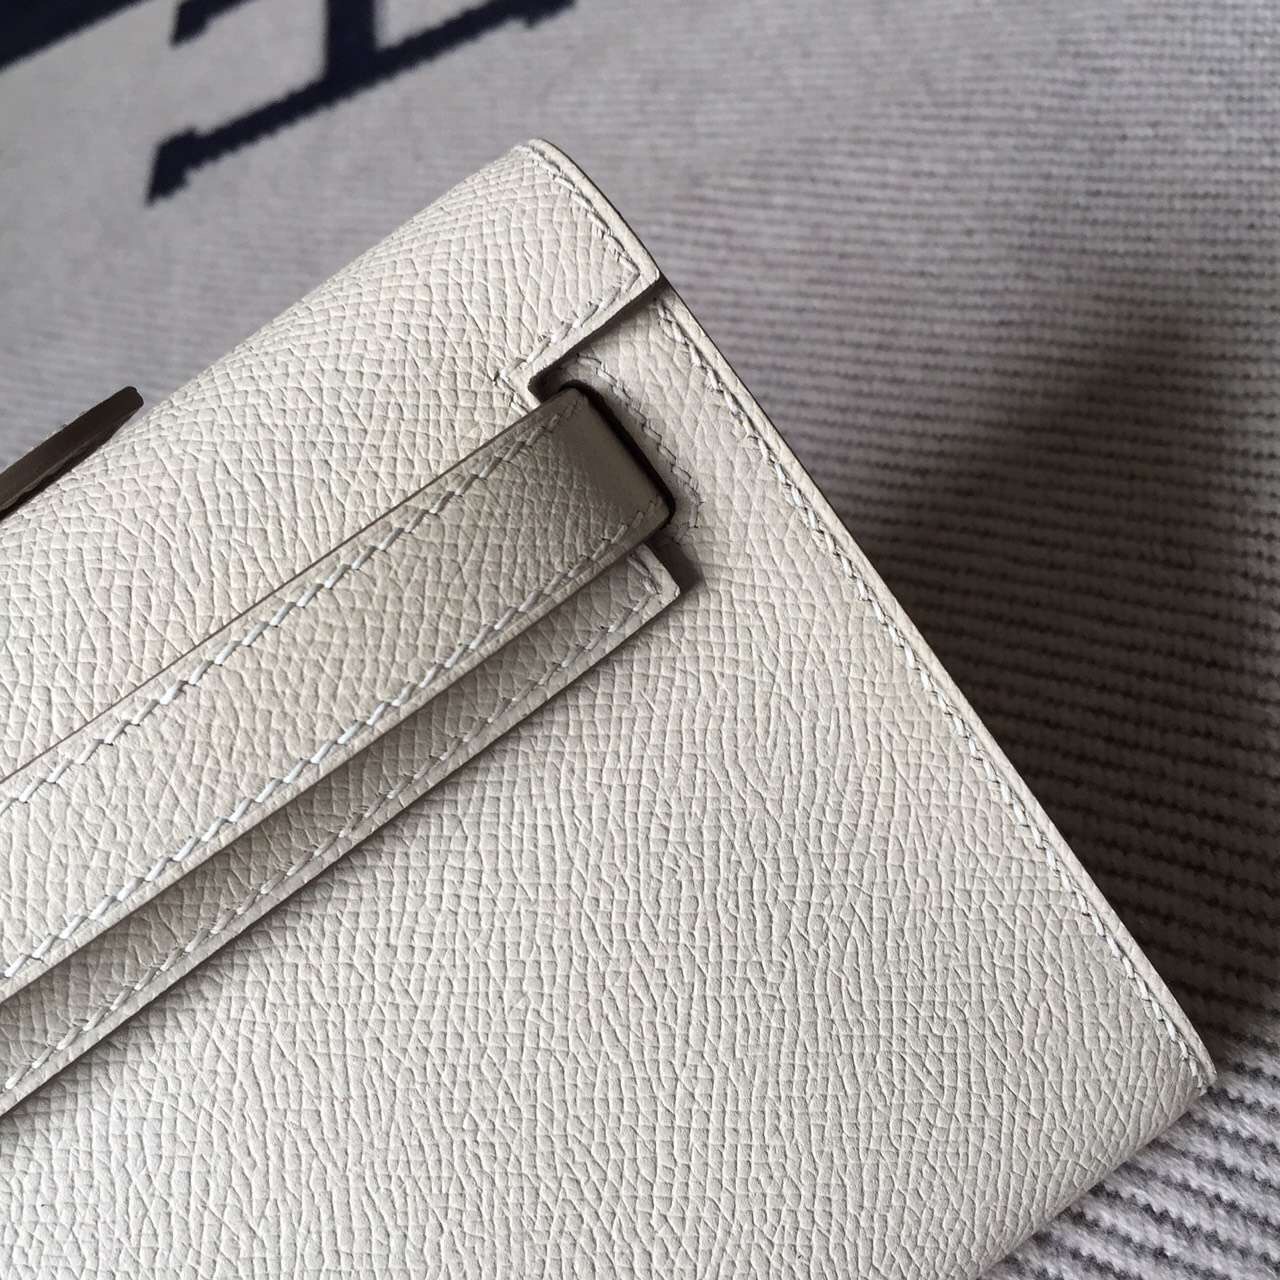 Discount Hermes Kelly Cut Clutch Bag in CK10 Carie White Epsom Leather